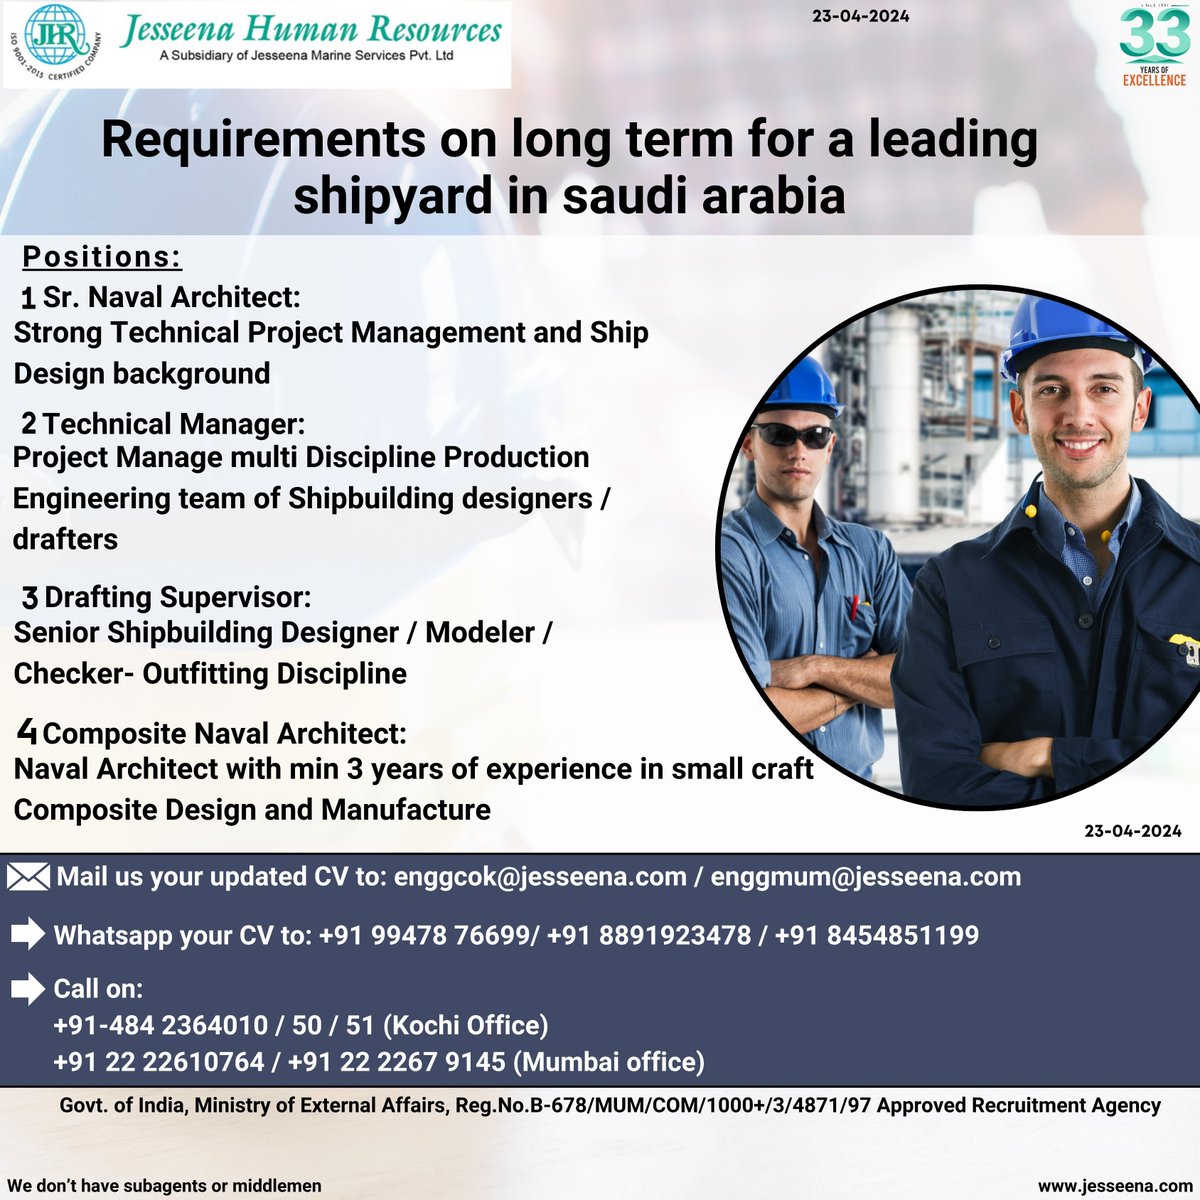 Requirements on long term for a leading shipyard in saudi arabia

Mail us your updated CV to: 
enggcok@jesseena.com / enggmum@jesseena.com

#ShipyardJobs #NavalArchitect #TechnicalManager #DraftingSupervisor #Shipbuilding #EngineeringJobs #ProjectManagement #CompositeDesigns